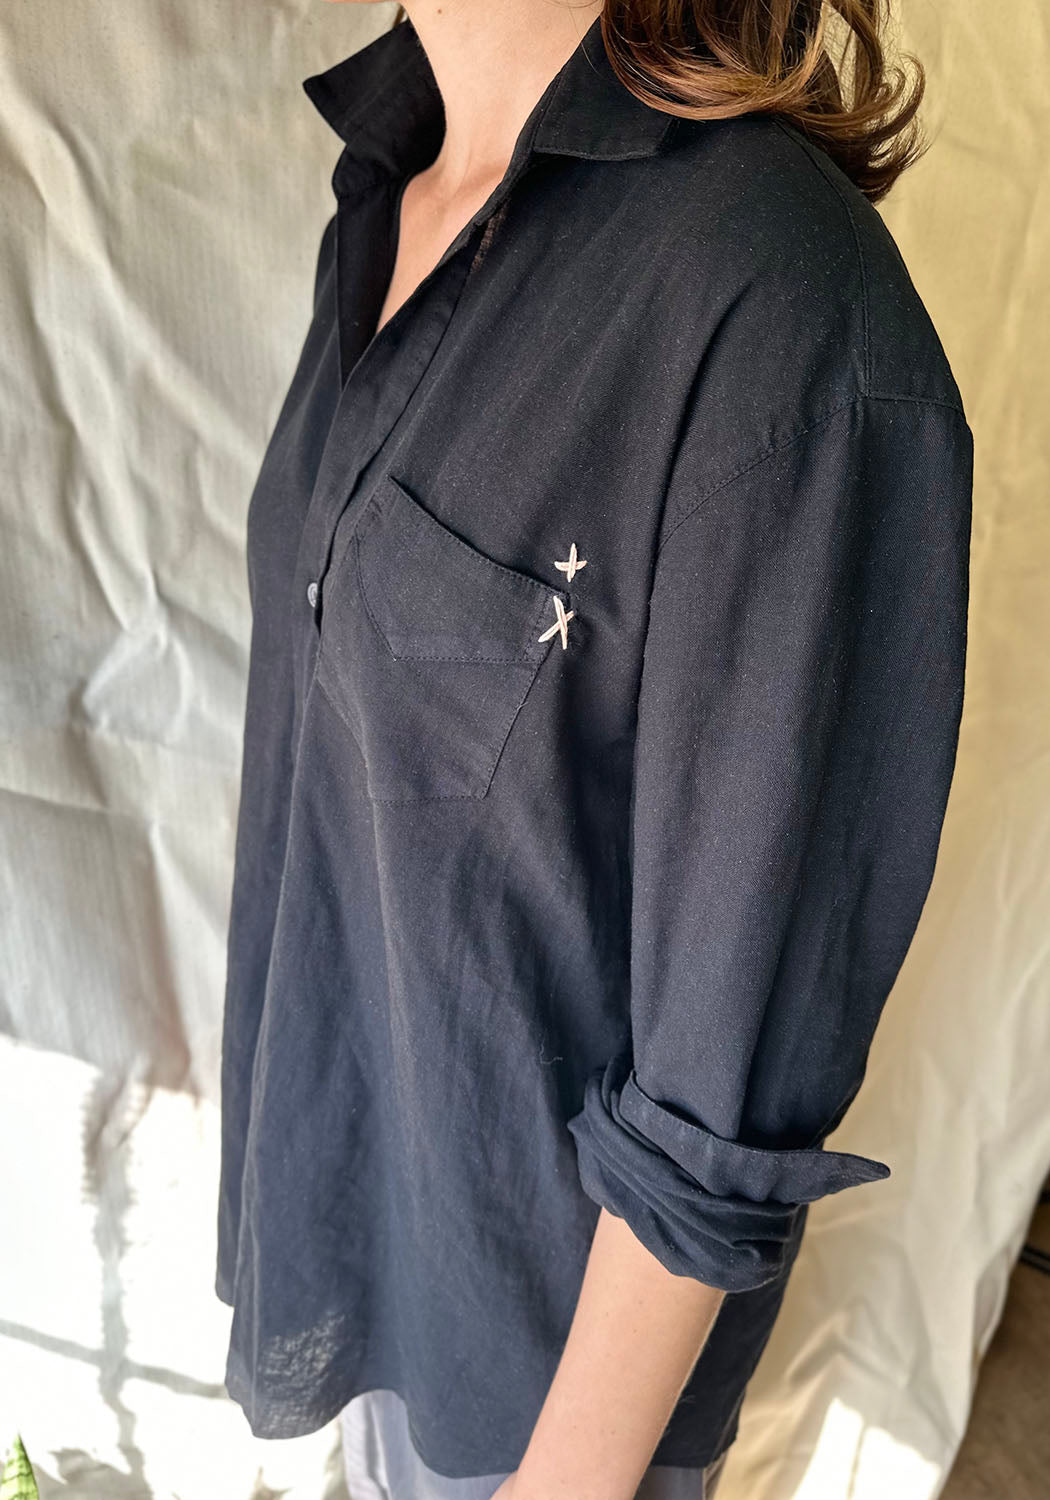 Le Classic Cotton and Linen Shirt in Black Charcoal